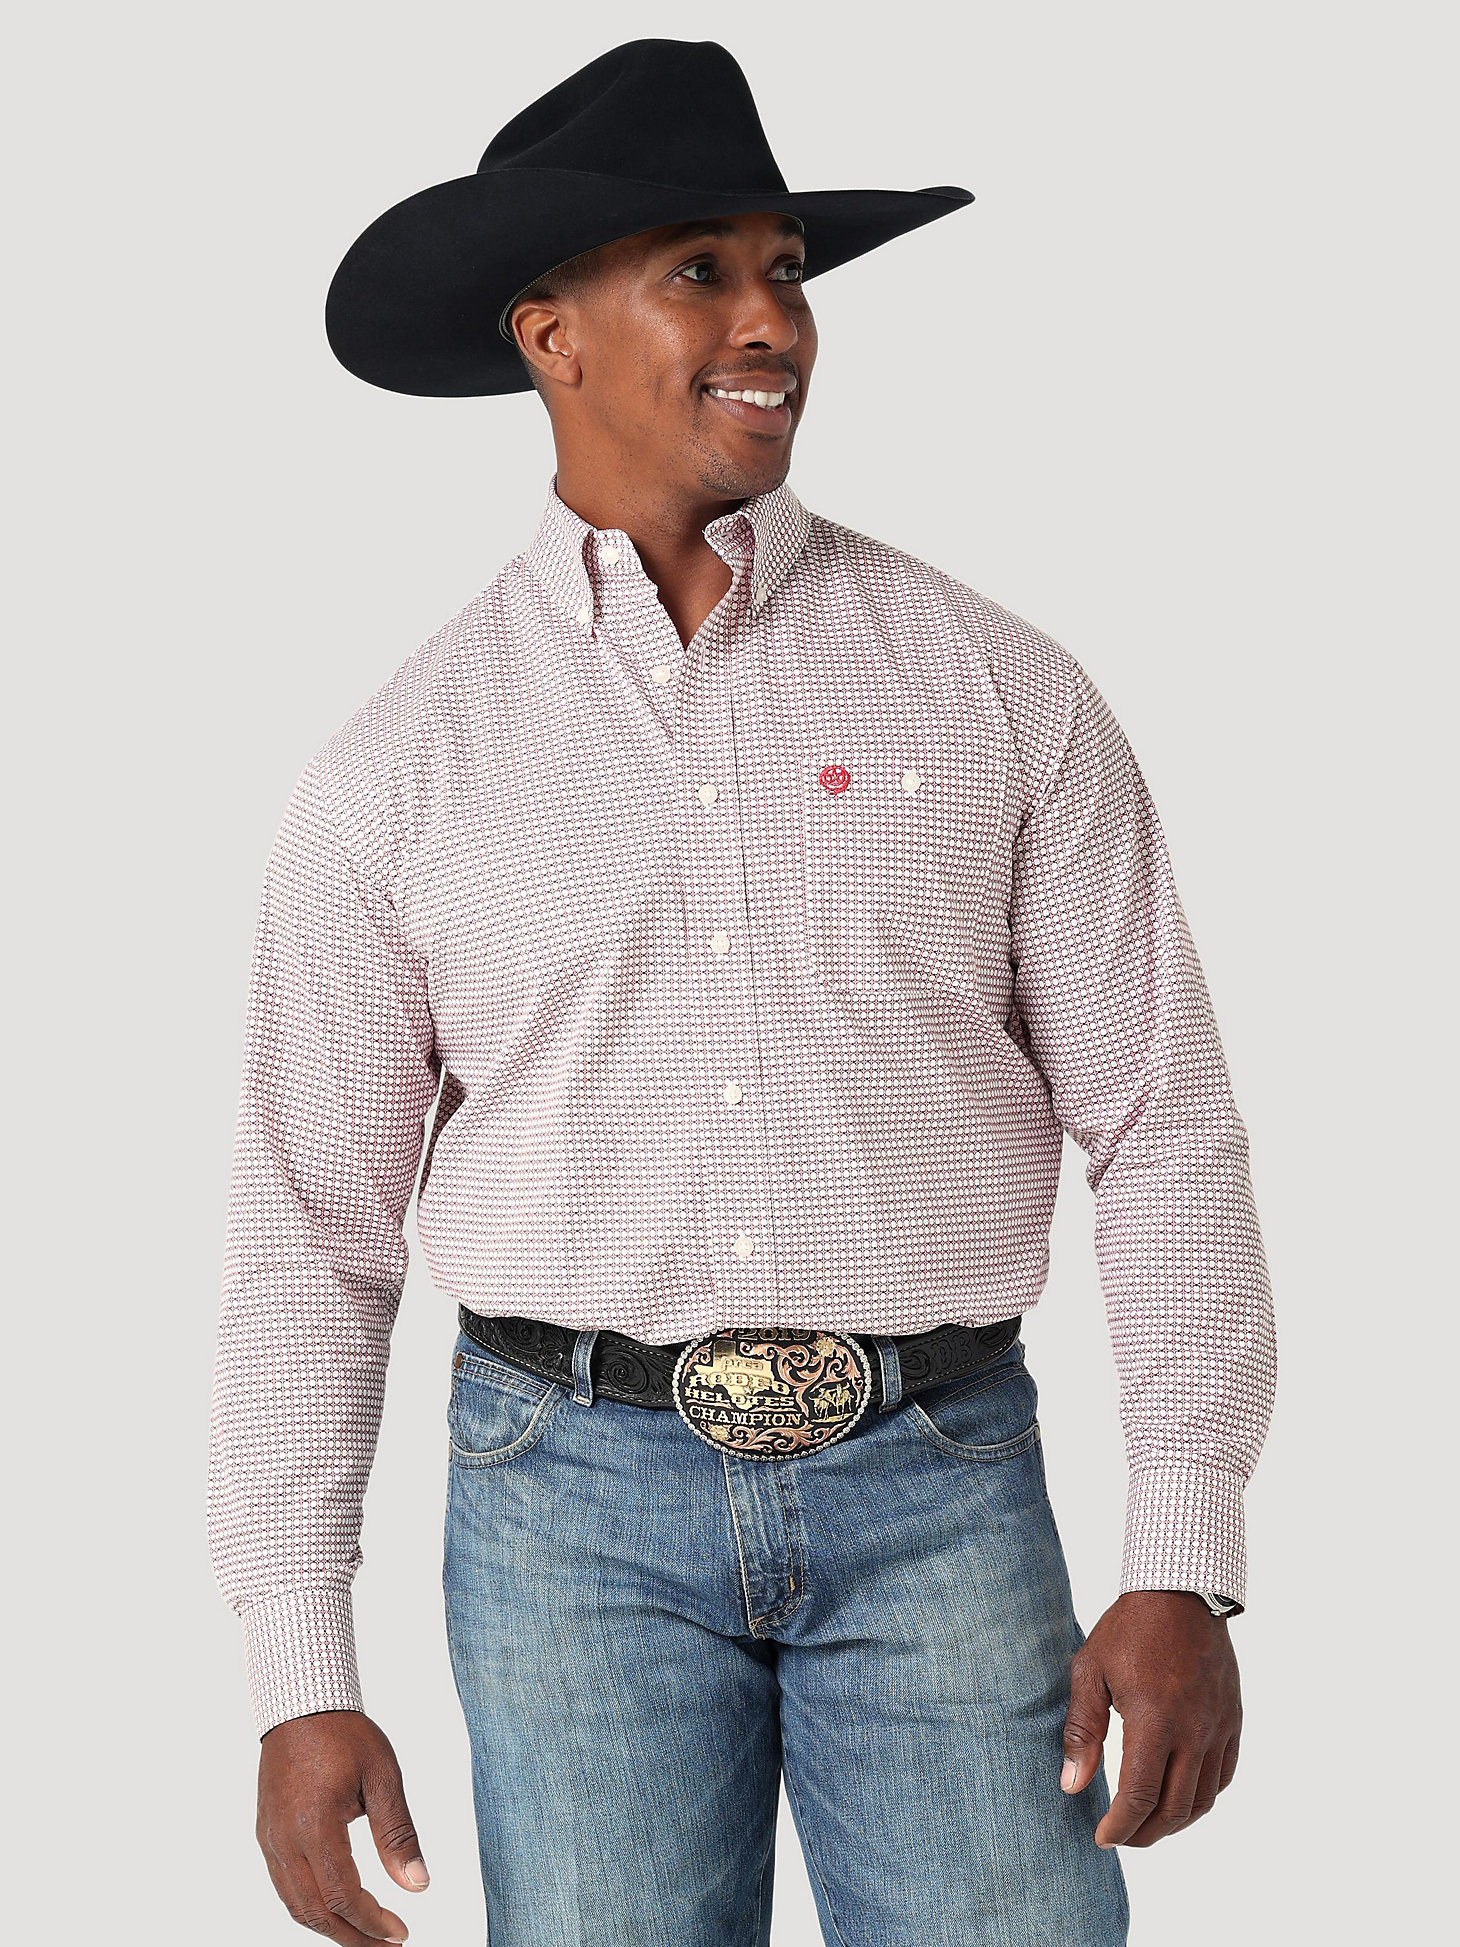 Men's George Strait Long Sleeve Button Down One Pocket Printed Shirt in Ruby Revival main view